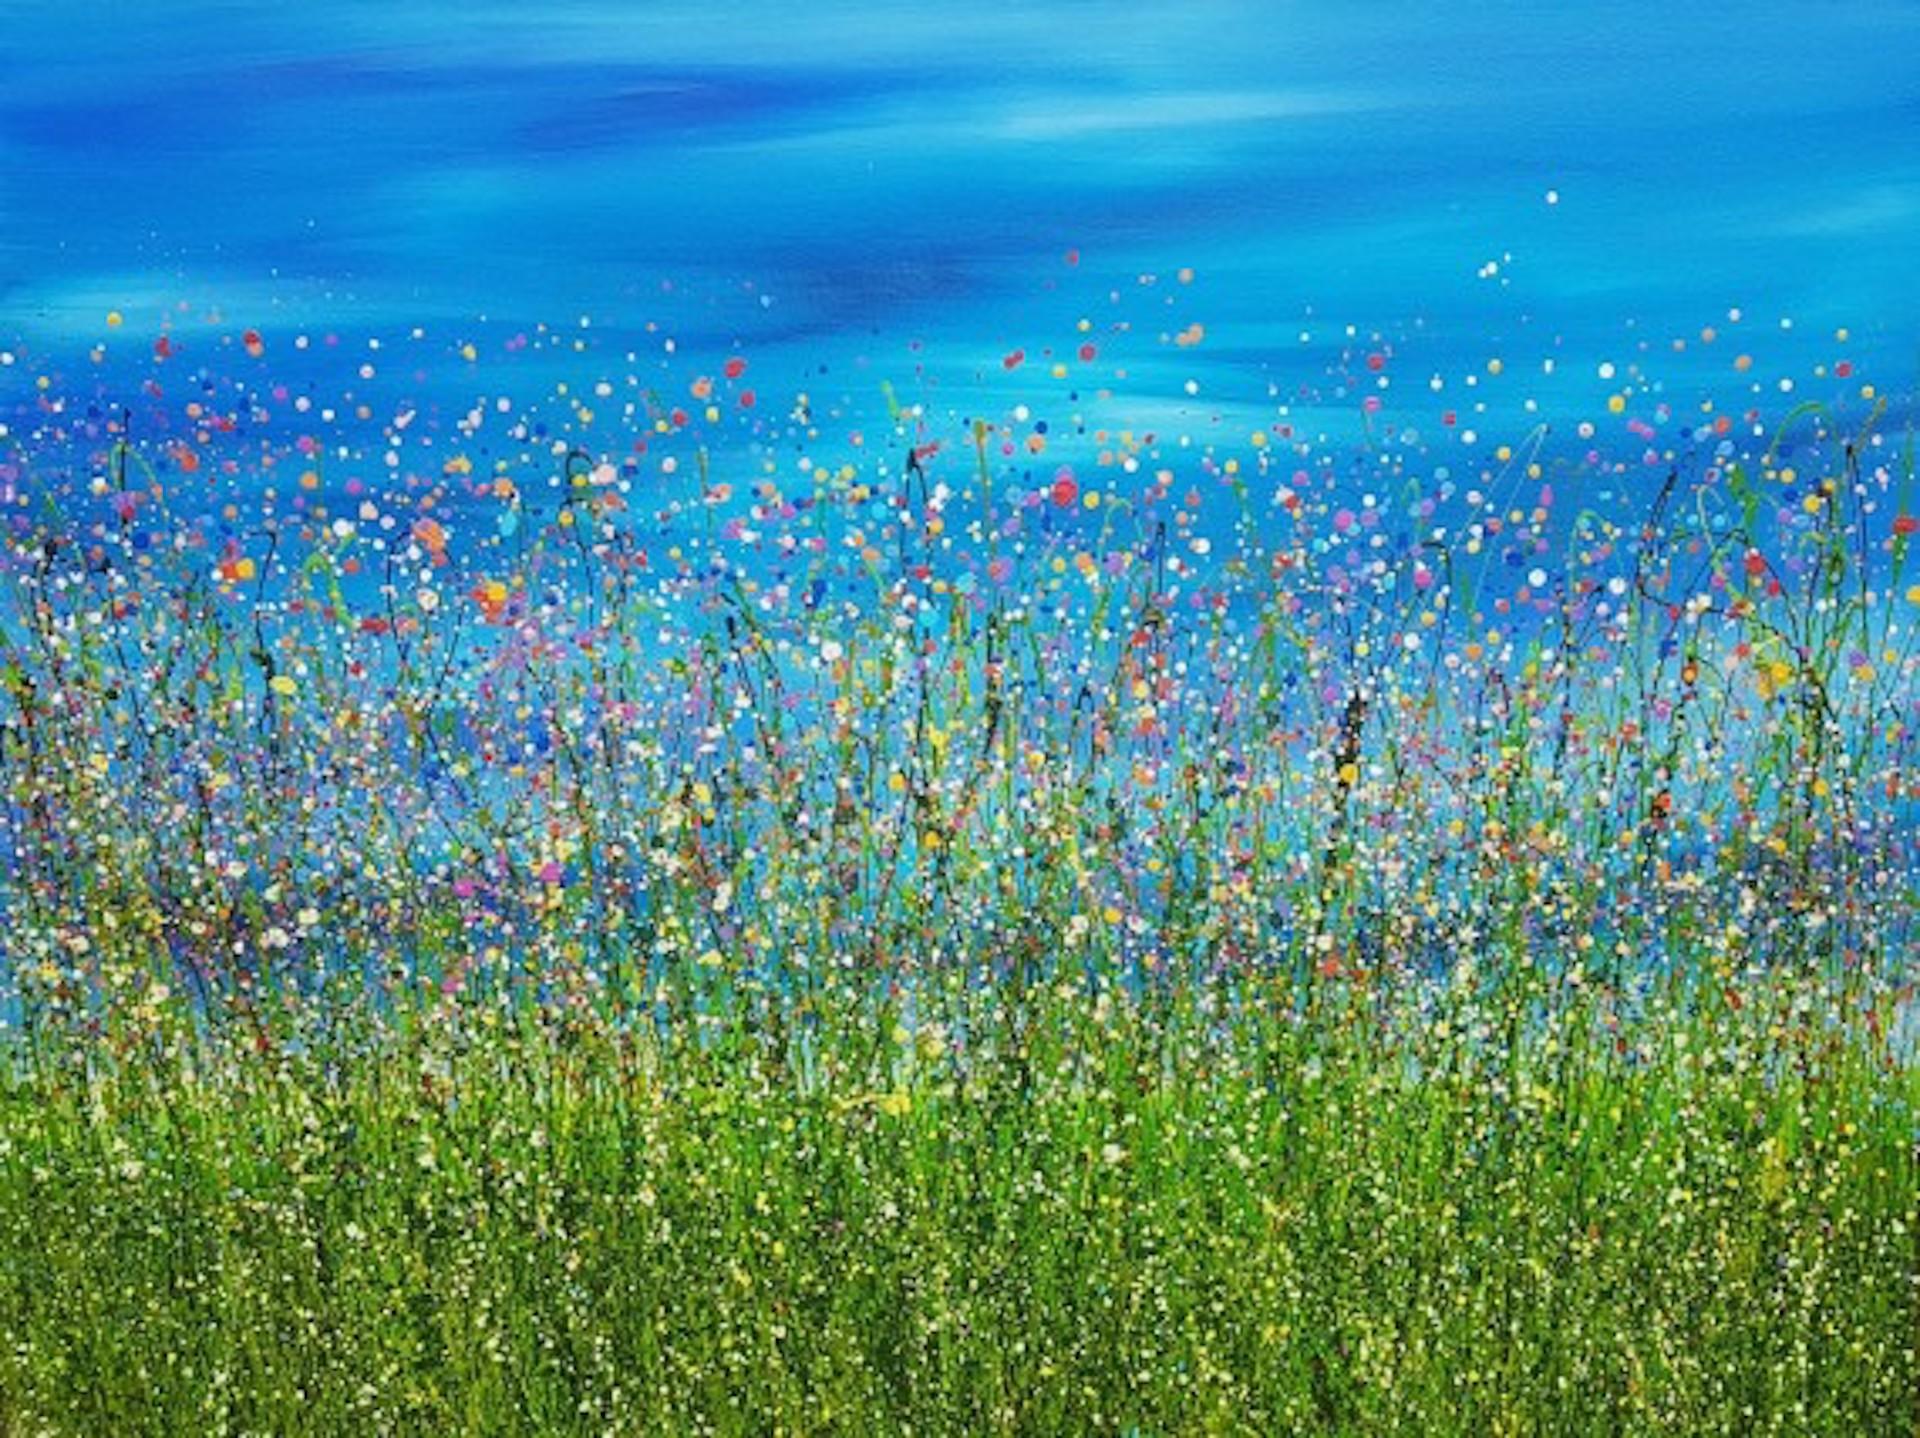 Wild Vintage Summer #10 – Exclusive To Wychwood [2021]
Original
Acrylic on canvas
Image size: H:60 cm x W:80 cm
Complete Size of Unframed Work: H:60 cm x W:80 cm x D:1.5cm
Sold Unframed
Please note that insitu images are purely an indication of how